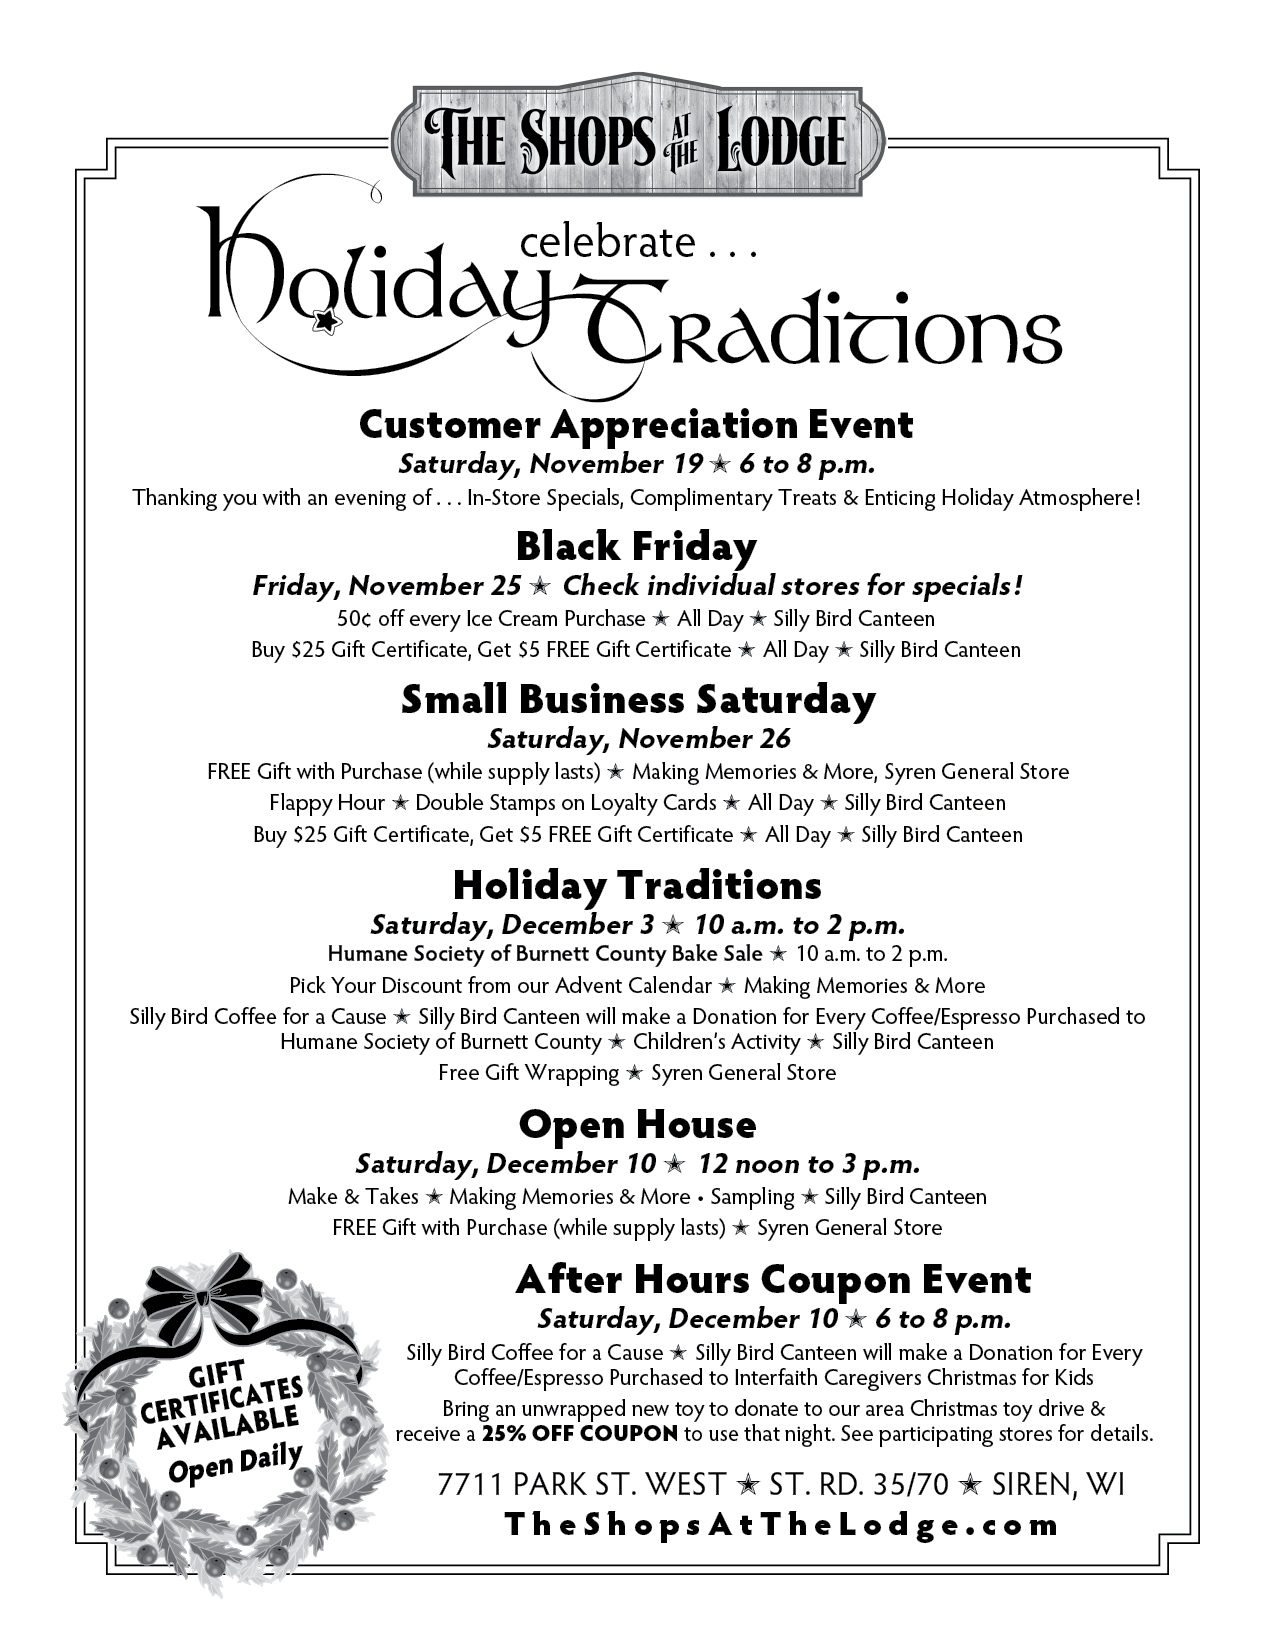 The Shops at the Lodge, Holiday Traditions, Siren, WI